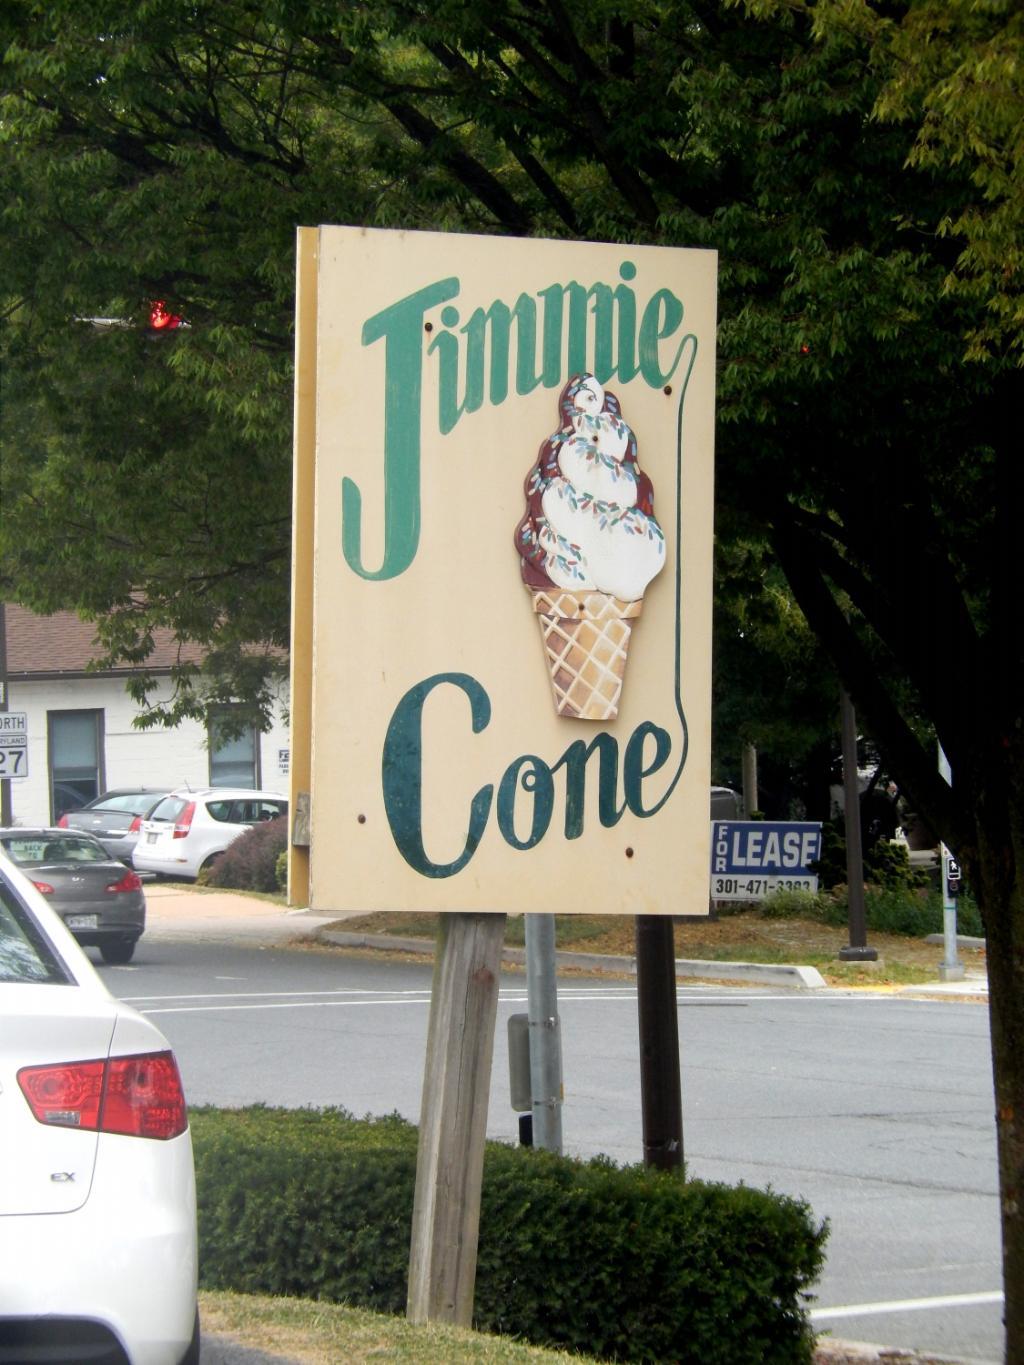 Jimmie Cone